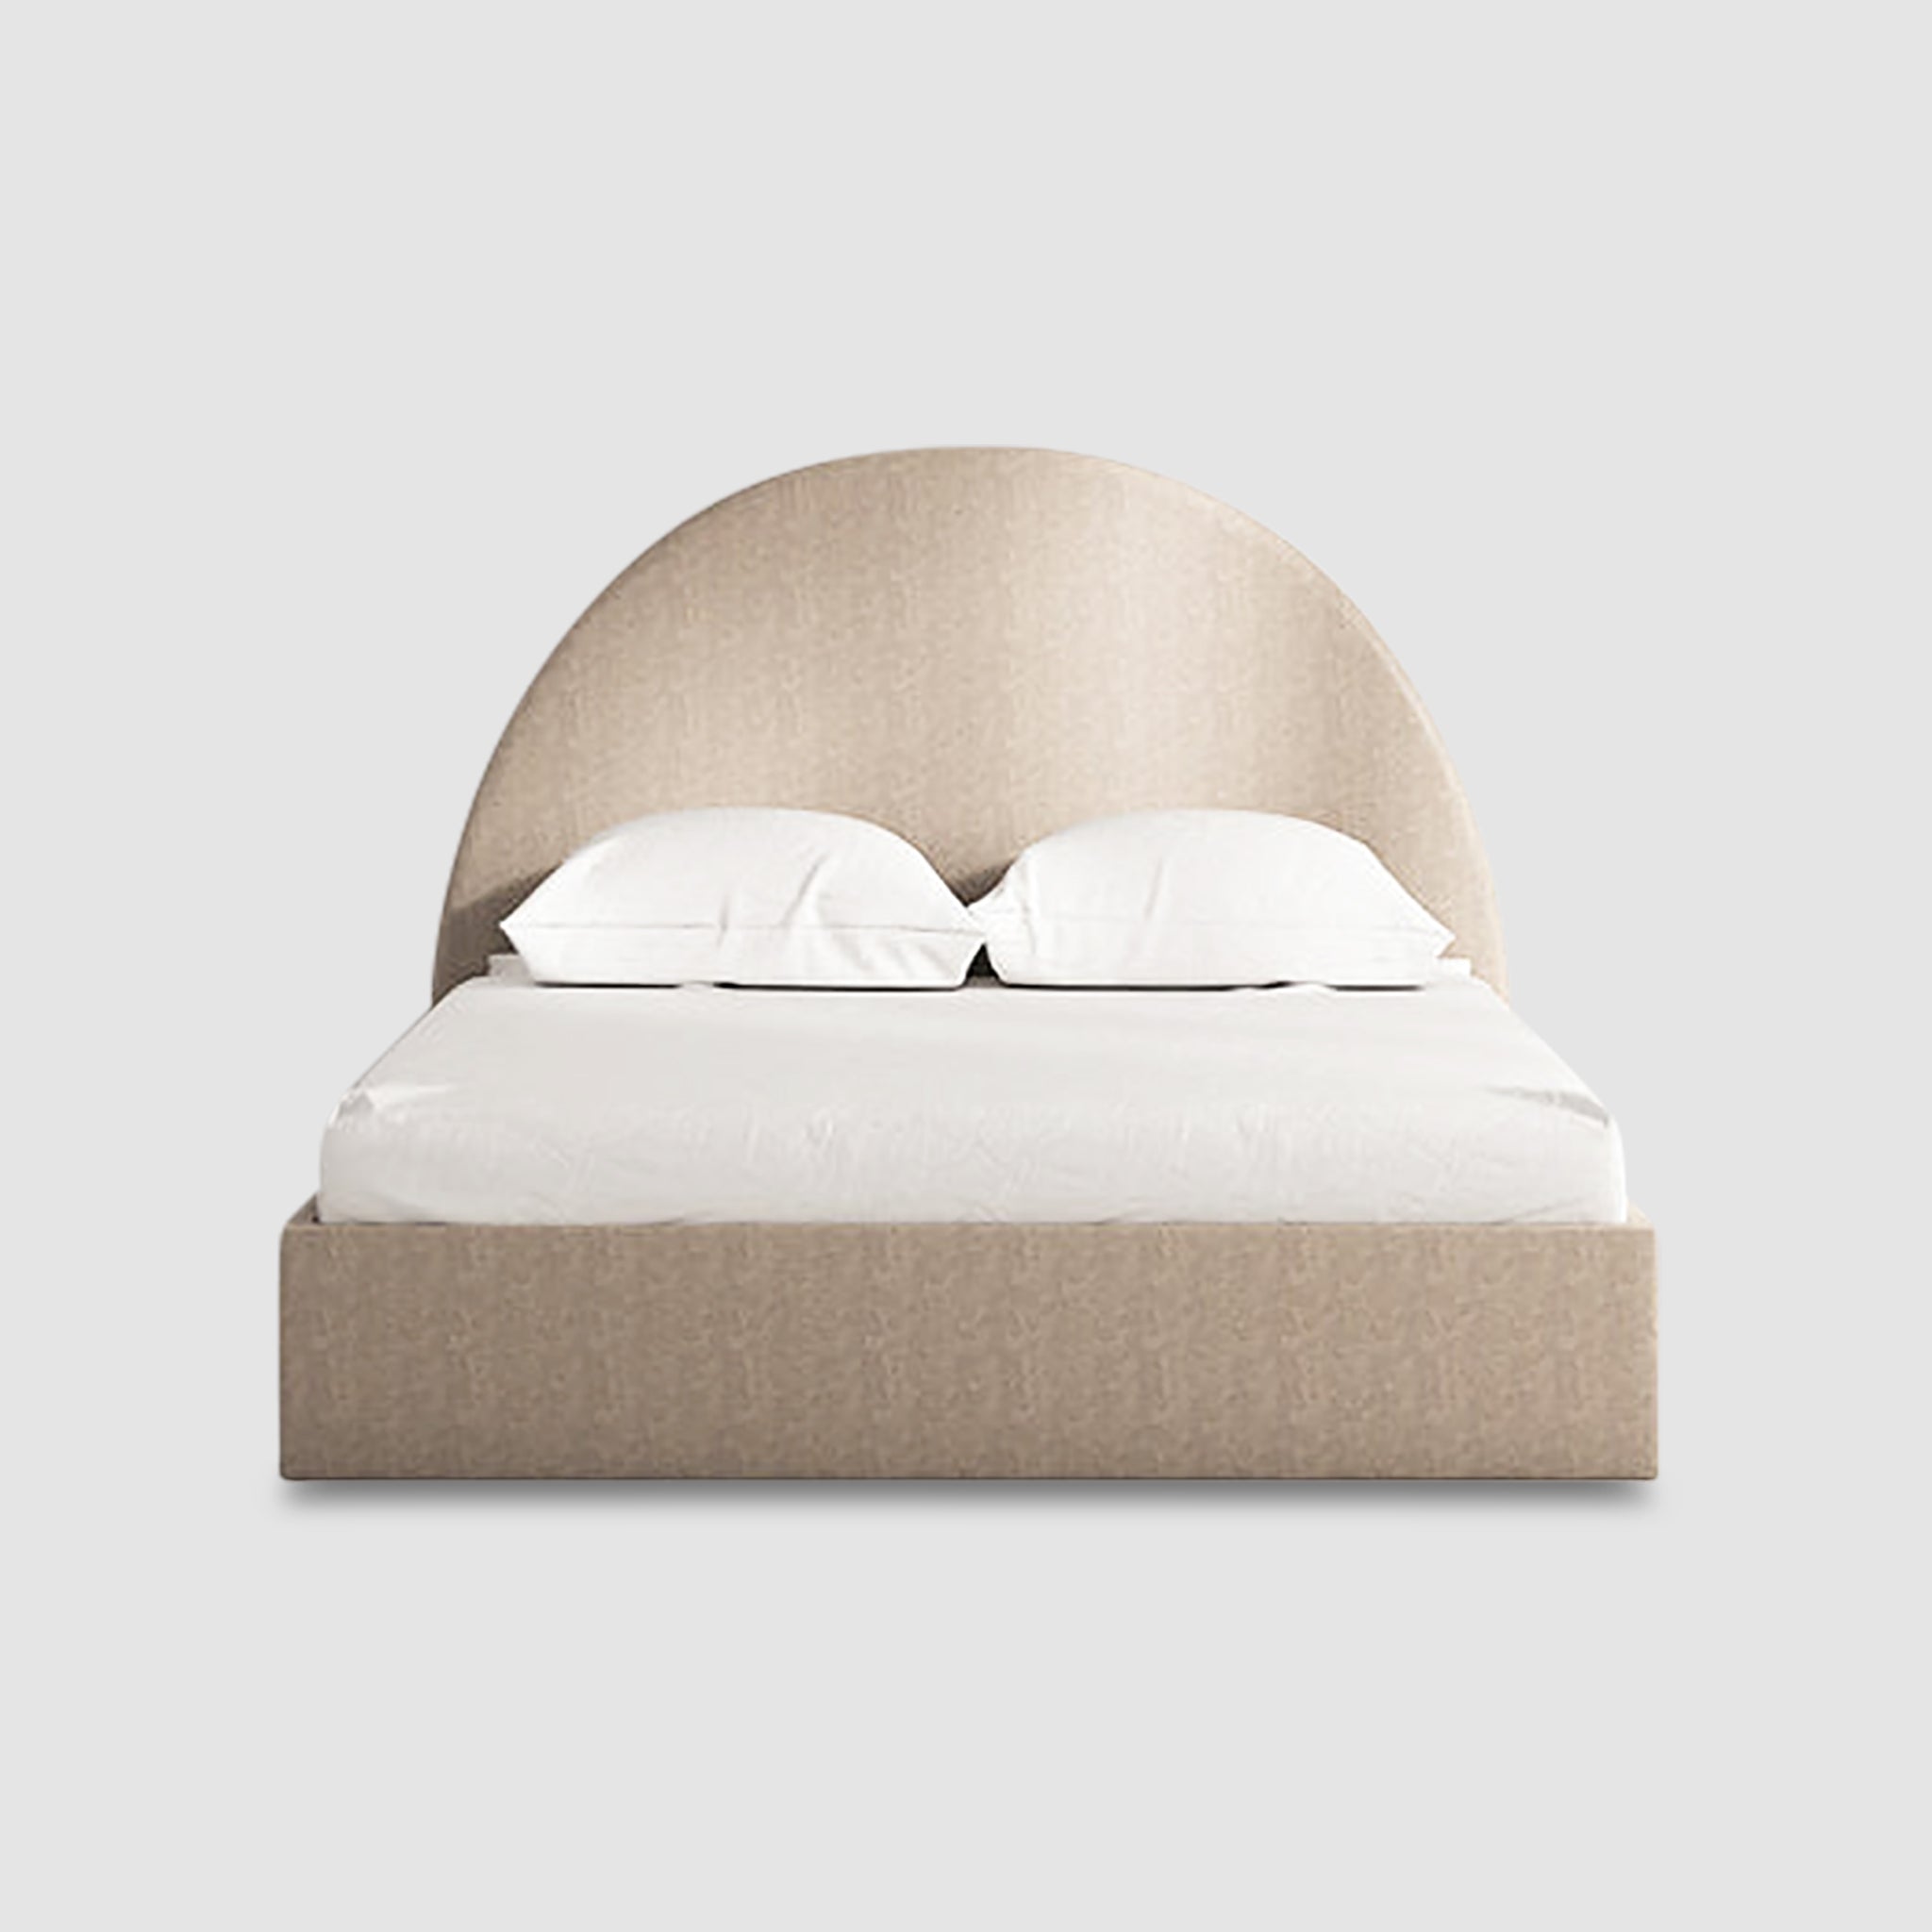 Luxurious light beige headboard of The Archie Bed, ideal for guest rooms.